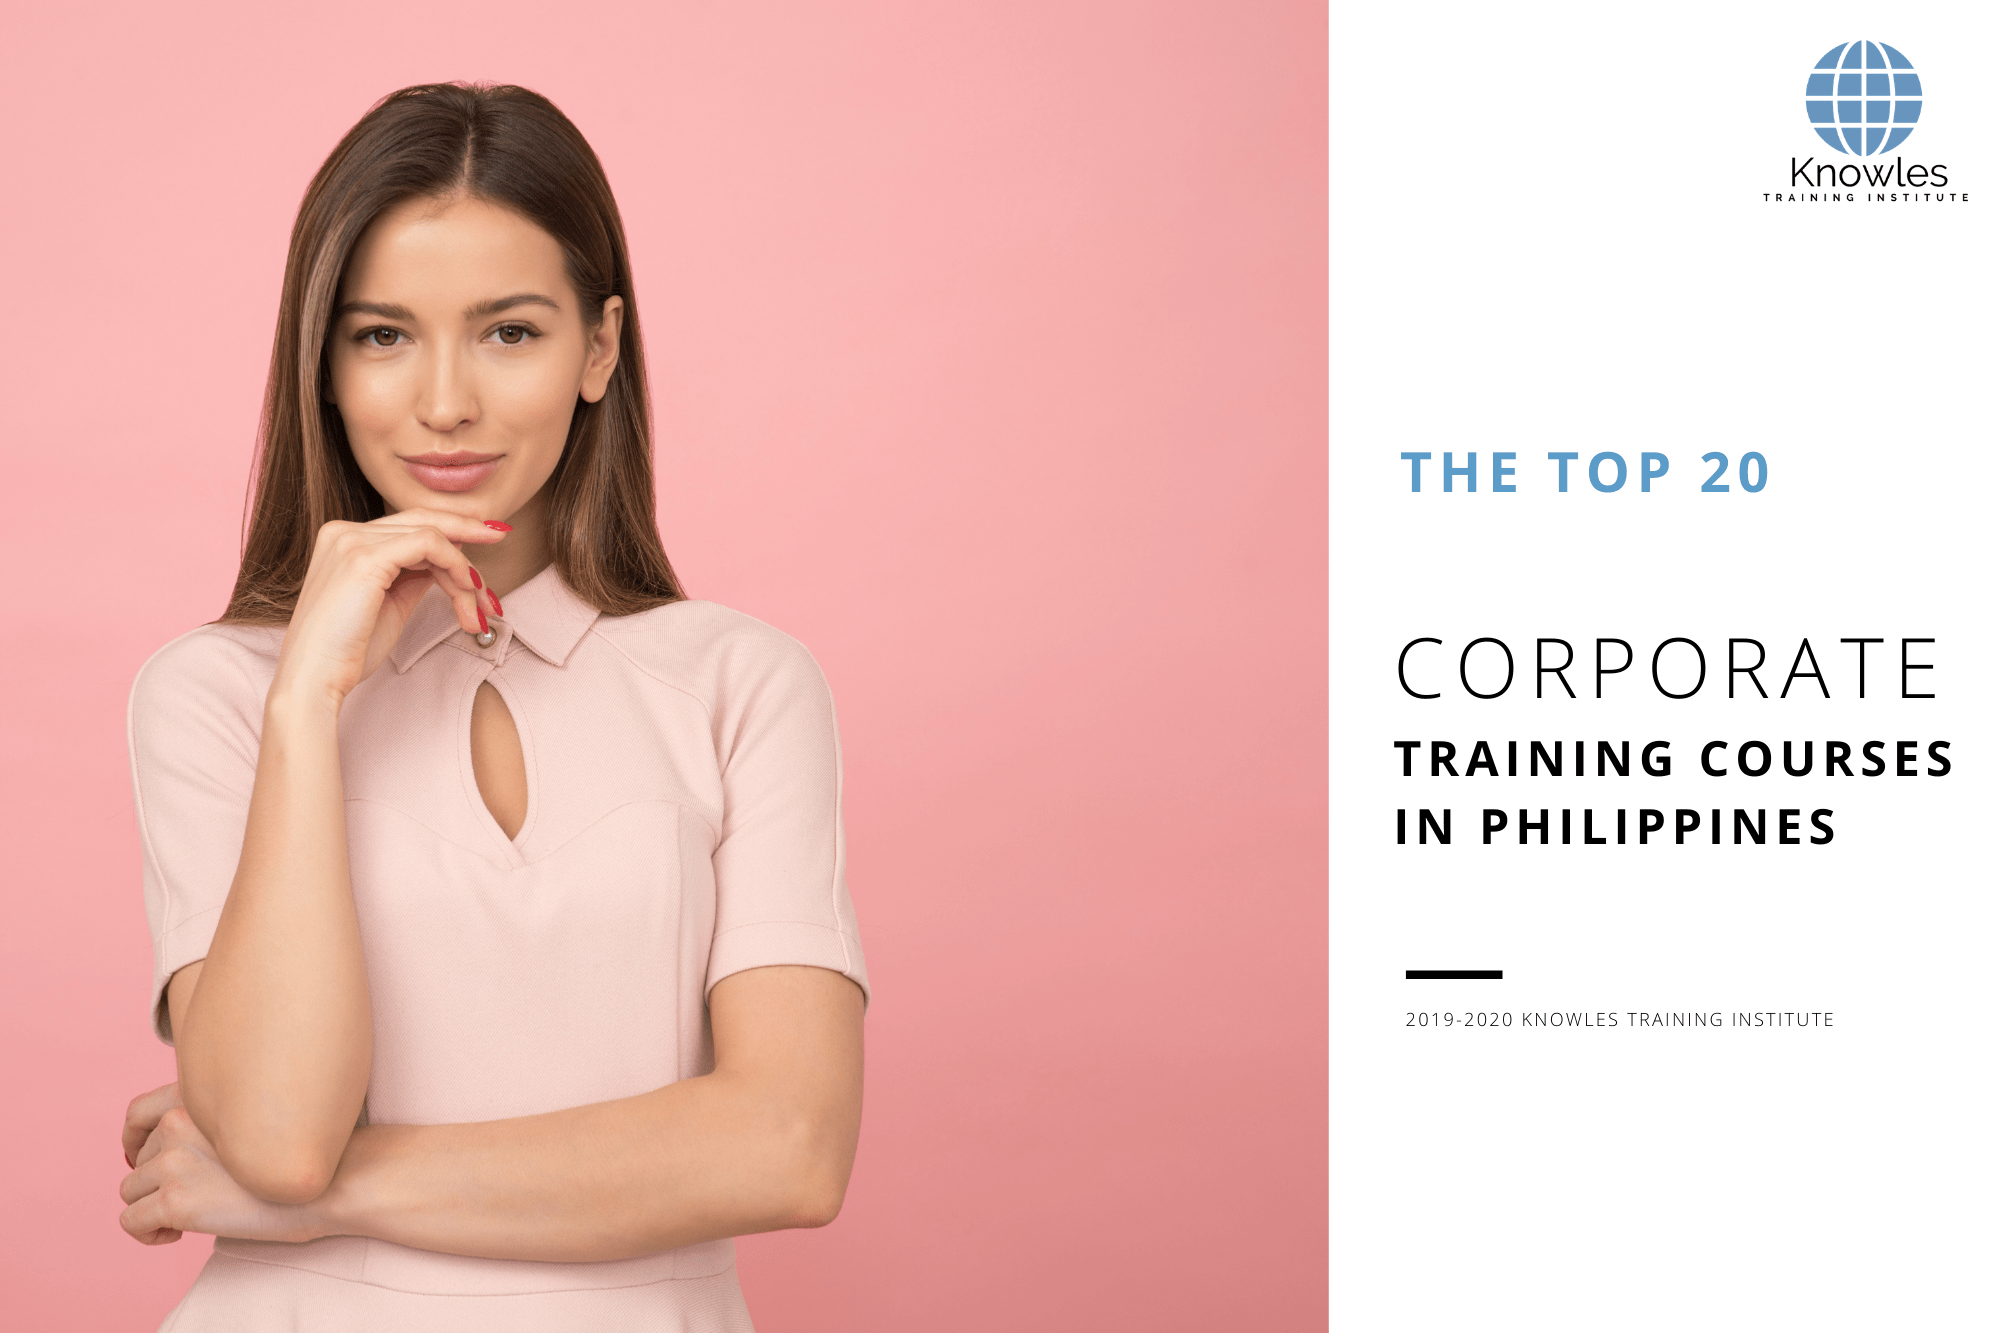 Corporate Training Courses In the Philippines